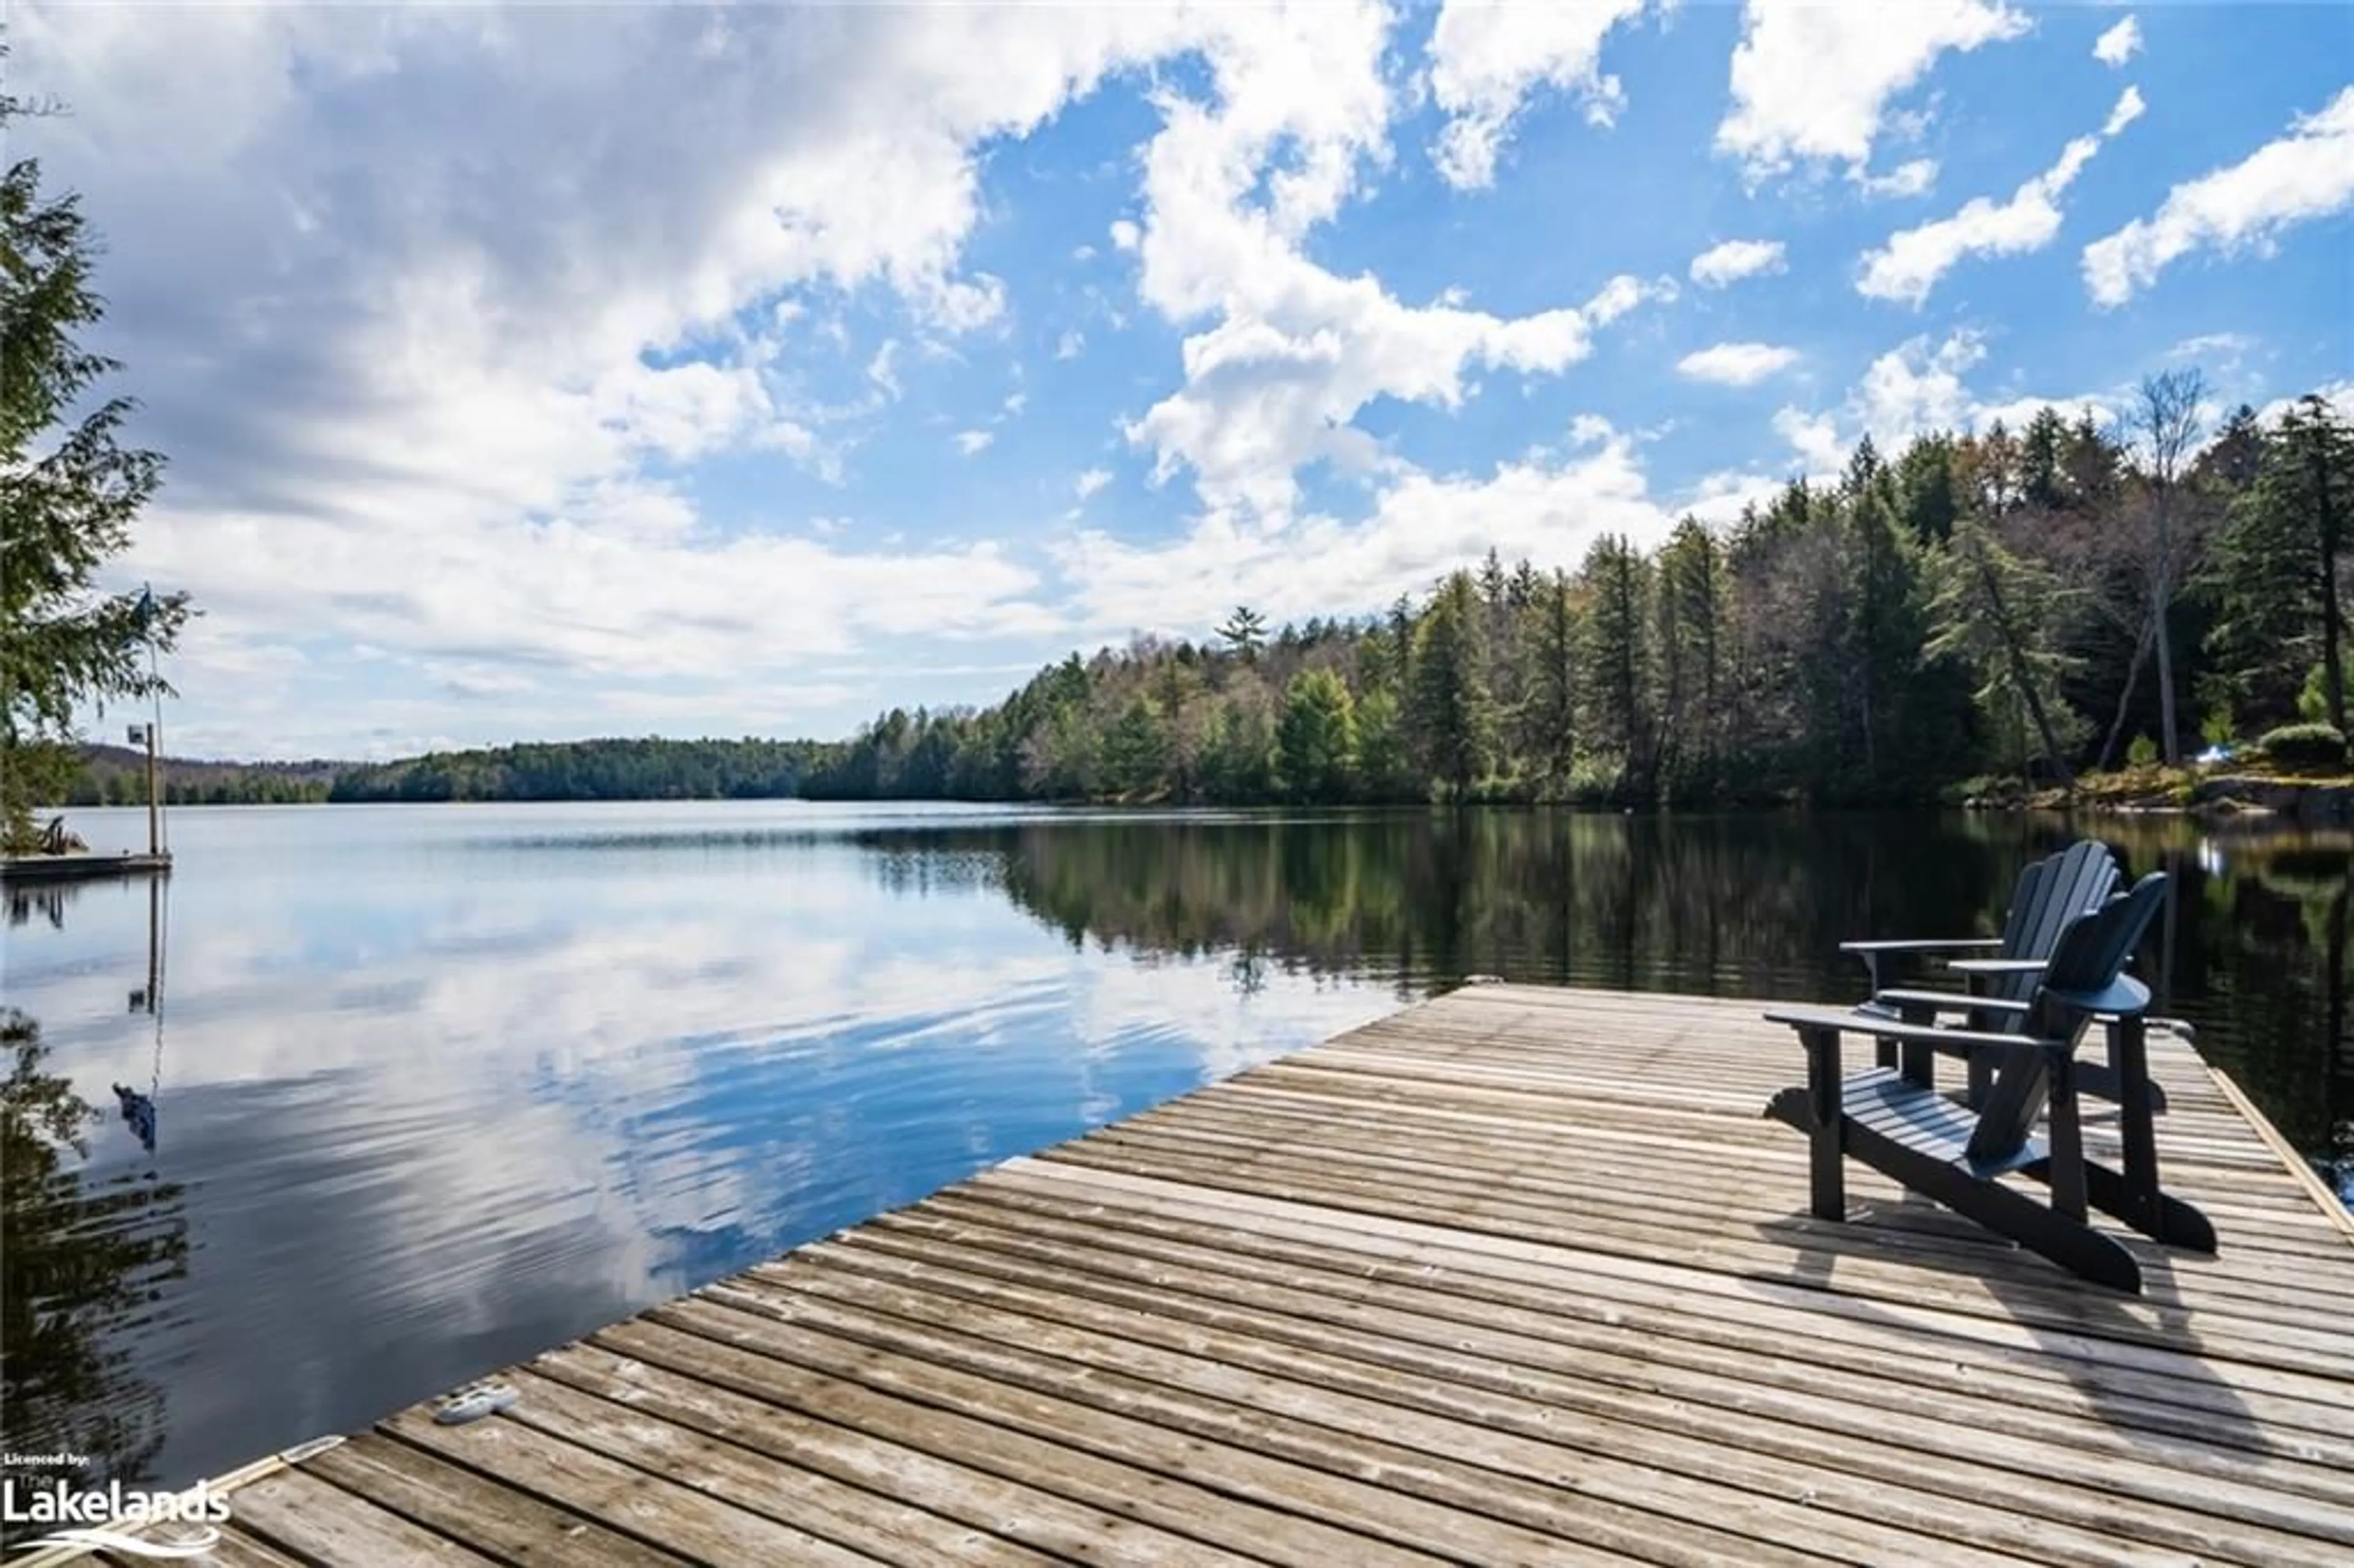 Lakeview for 54 South Crane Lake Rd, Archipelago (Twp) Ontario P2A 0B7